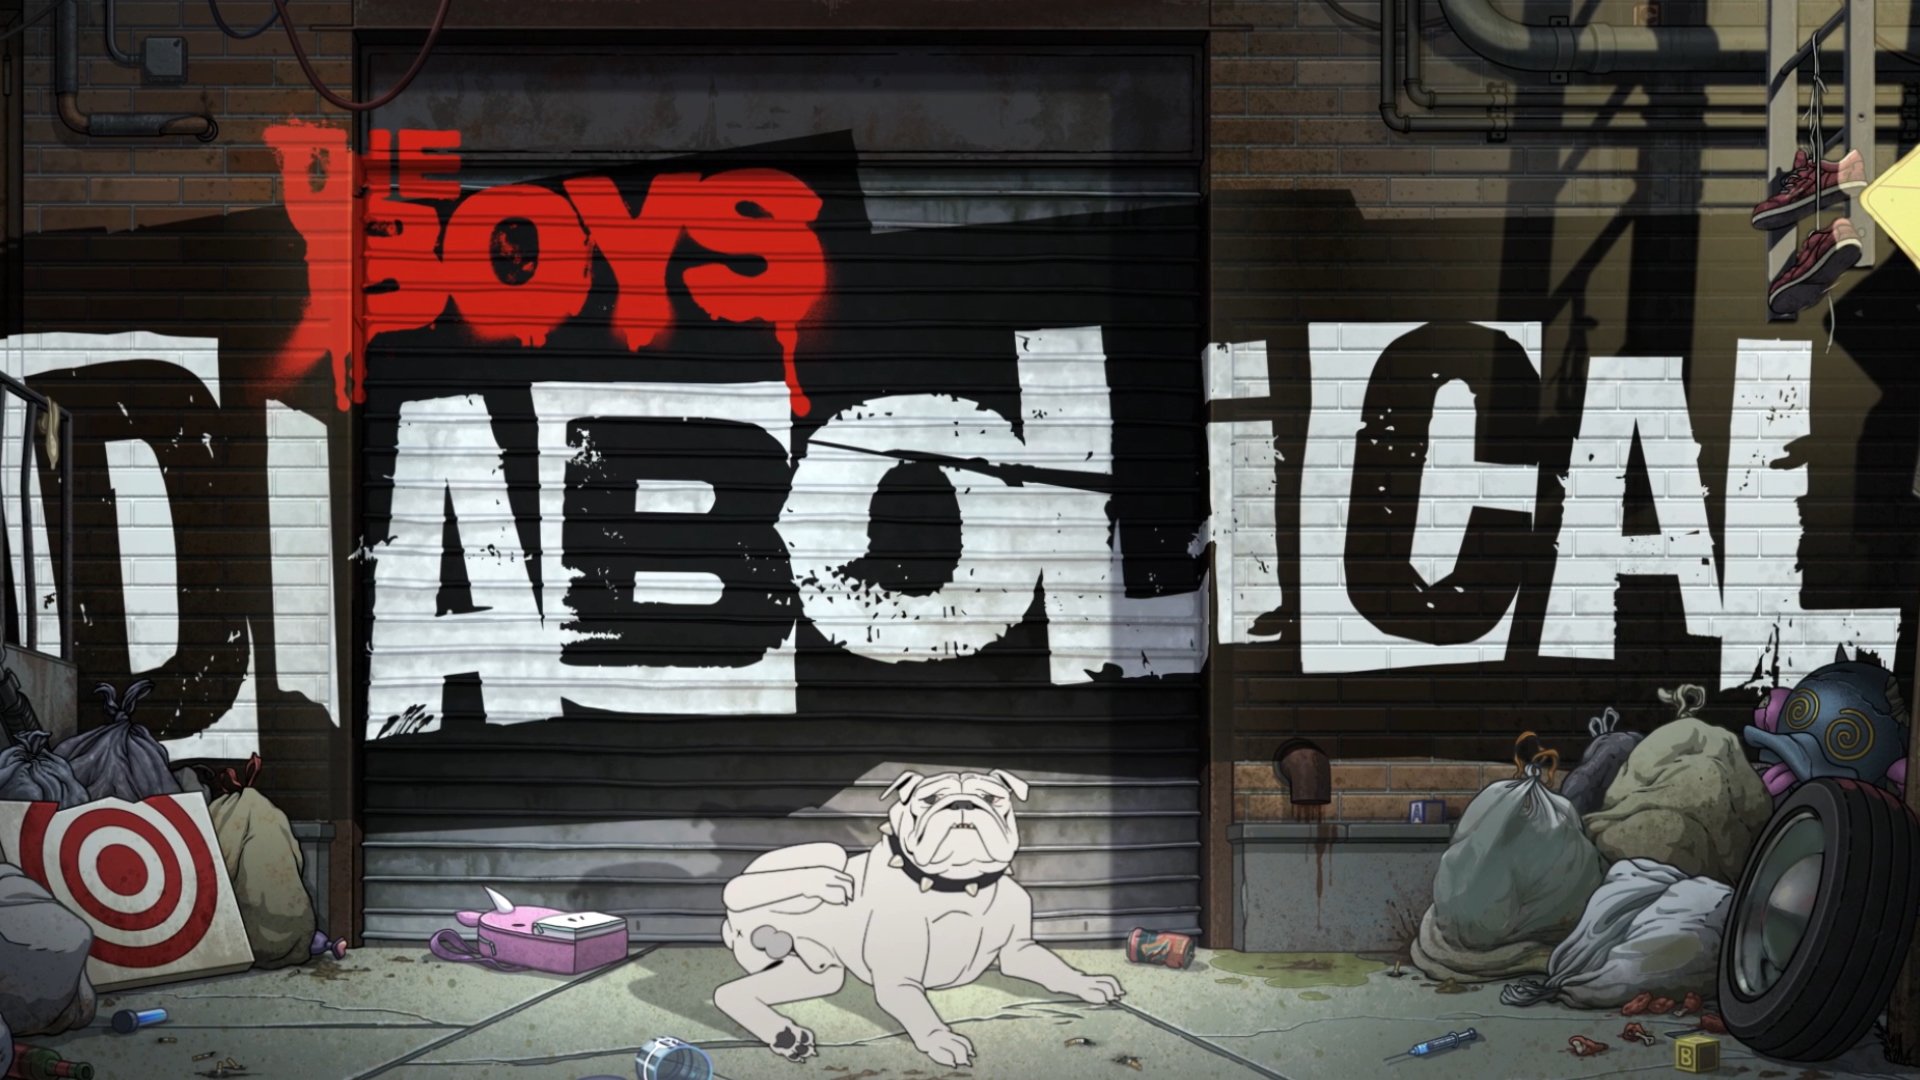 Key art for Prime Video series 'The Boys Presents: Diabolical.' It shows the logo, as well as a bulldog on the ground next to bags of garbage.